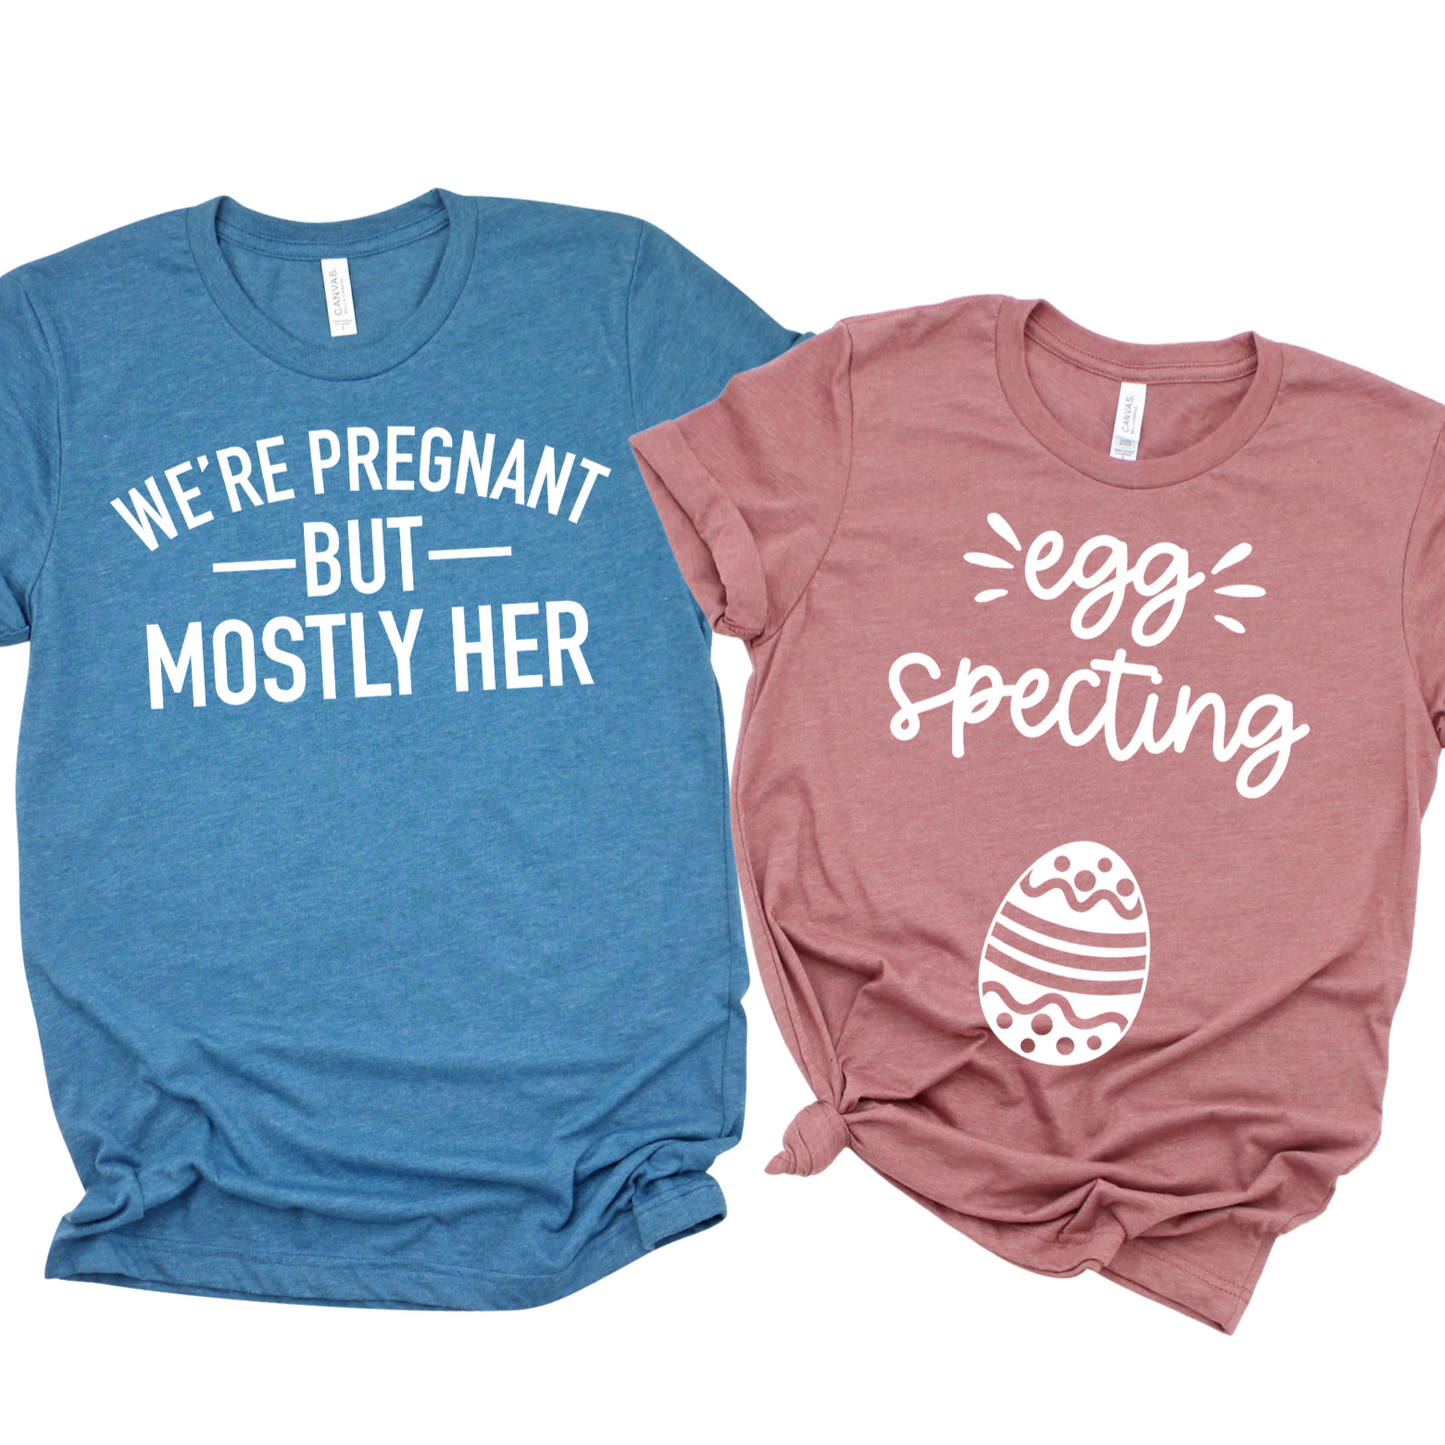 We're Pregnant But Mostly Her | Eggspecting